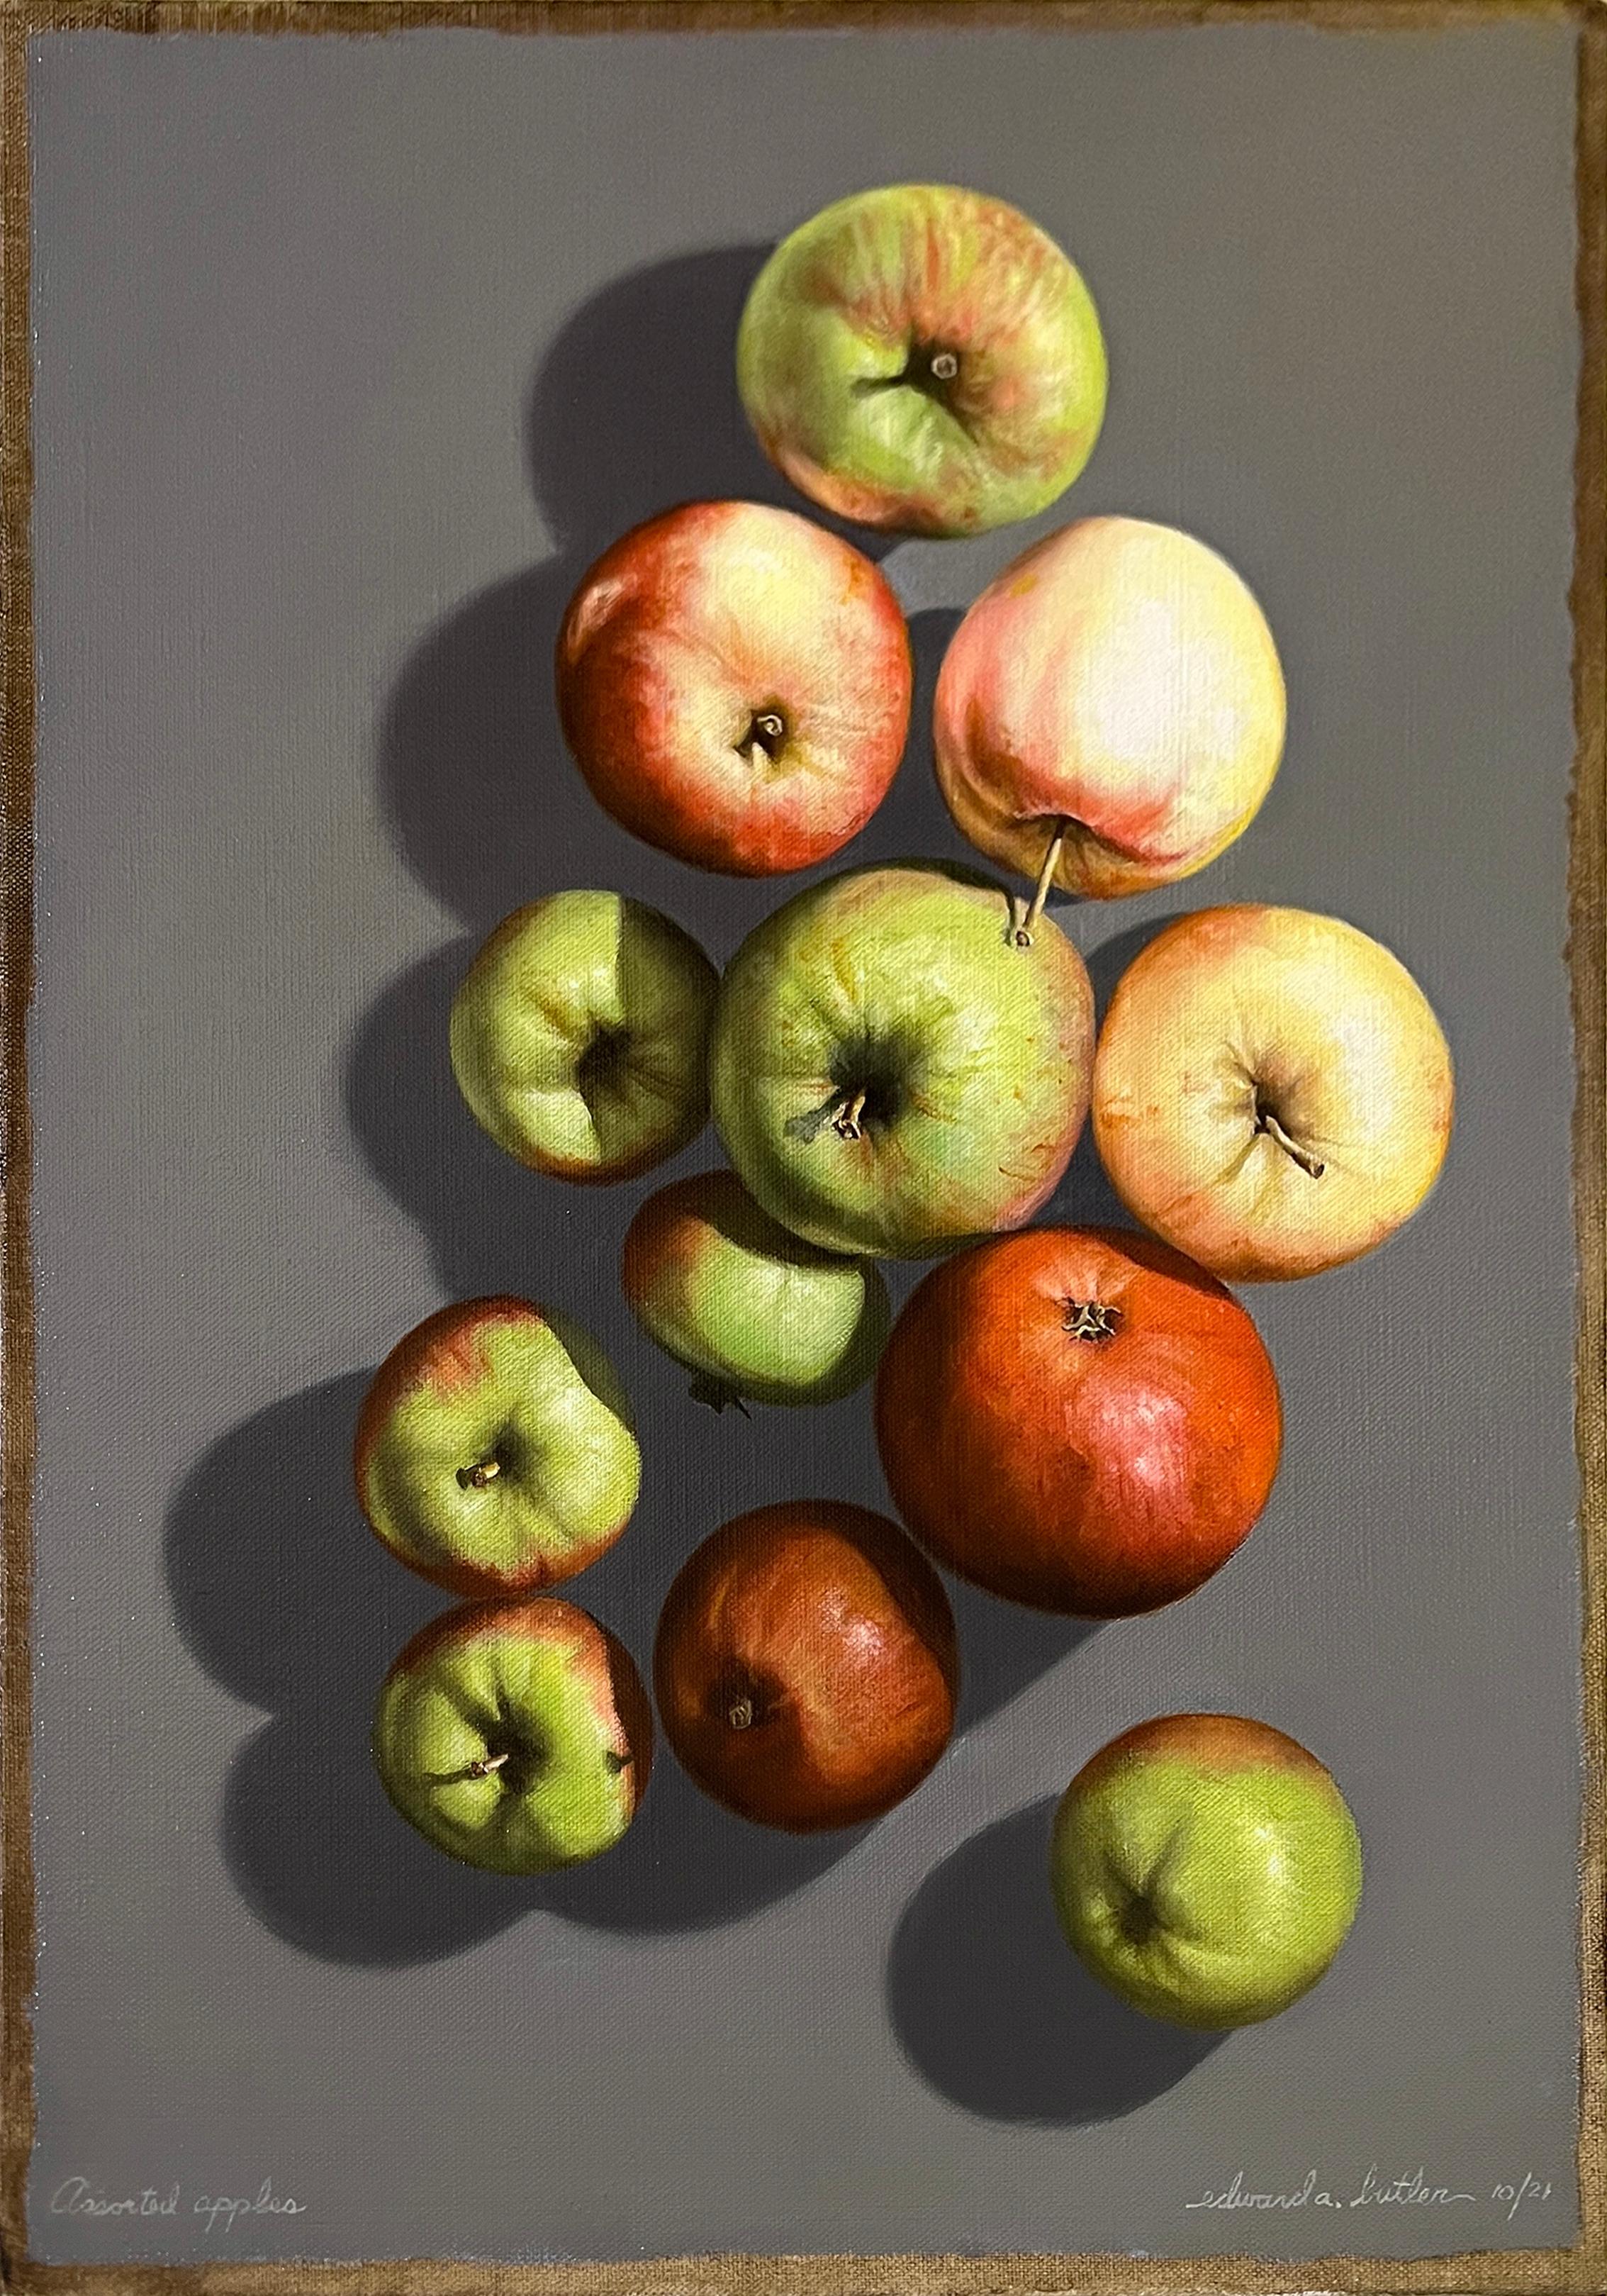 ASSORTED APPLES - Contemporary Still Life / Realism / Photorealism